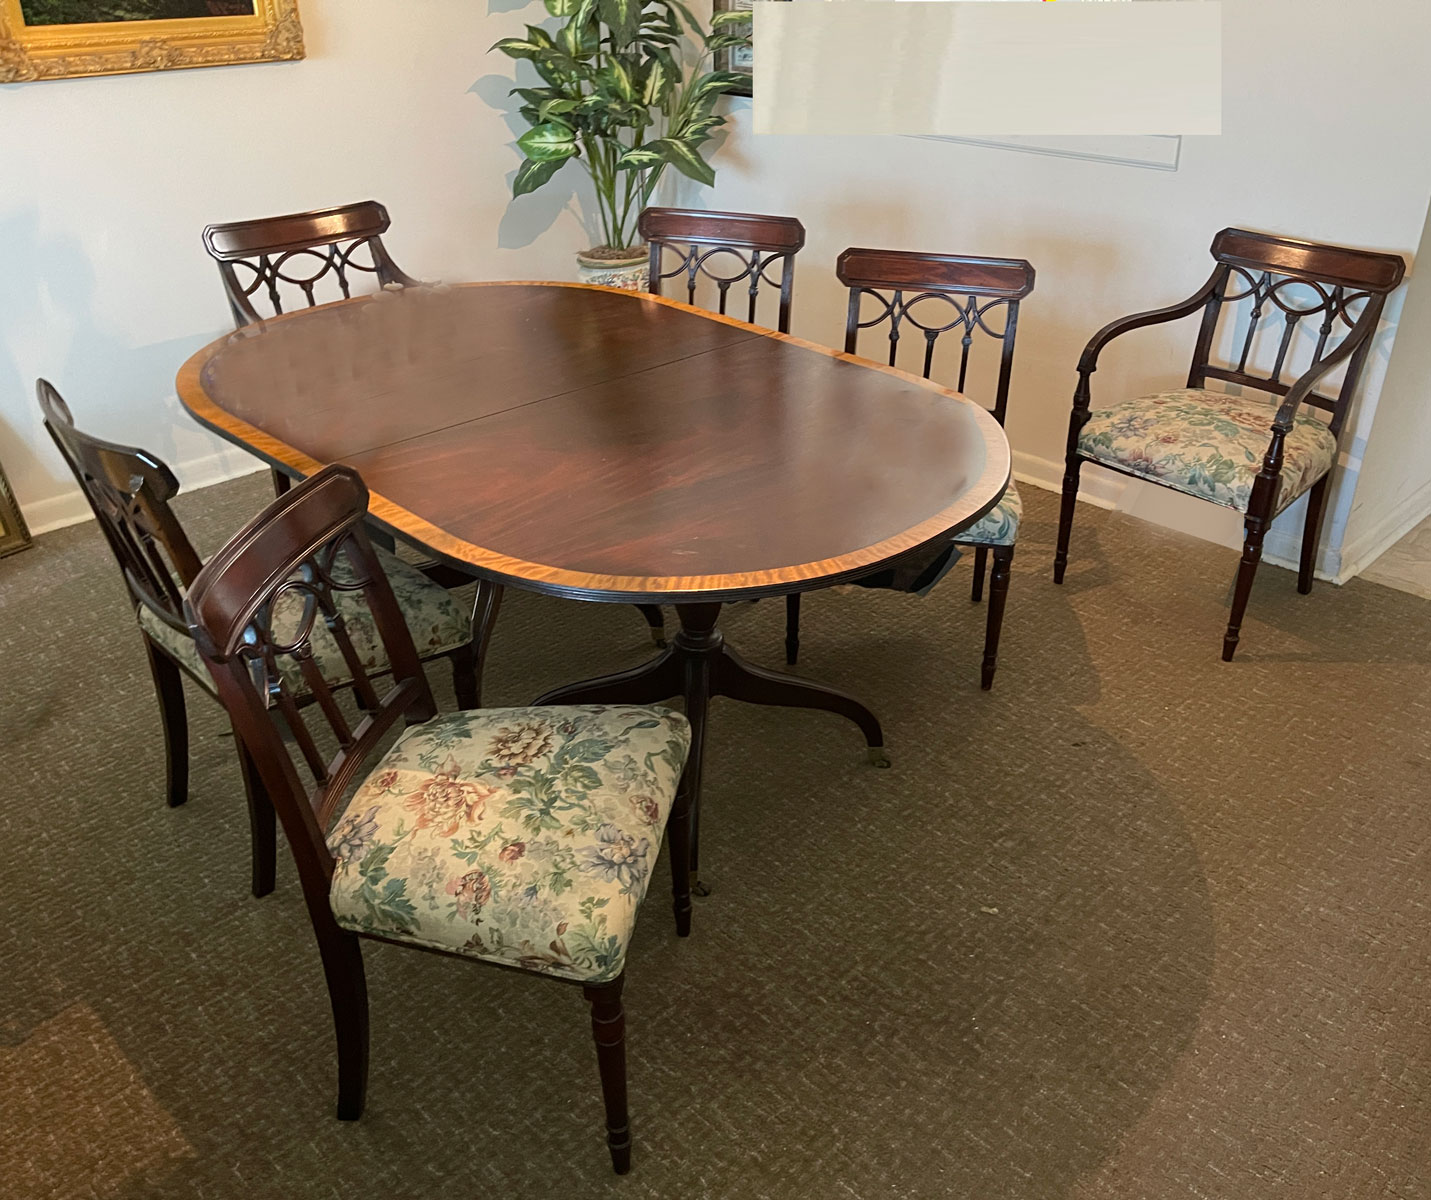 7 PC. DINING TABLE & CHAIRS: Banded